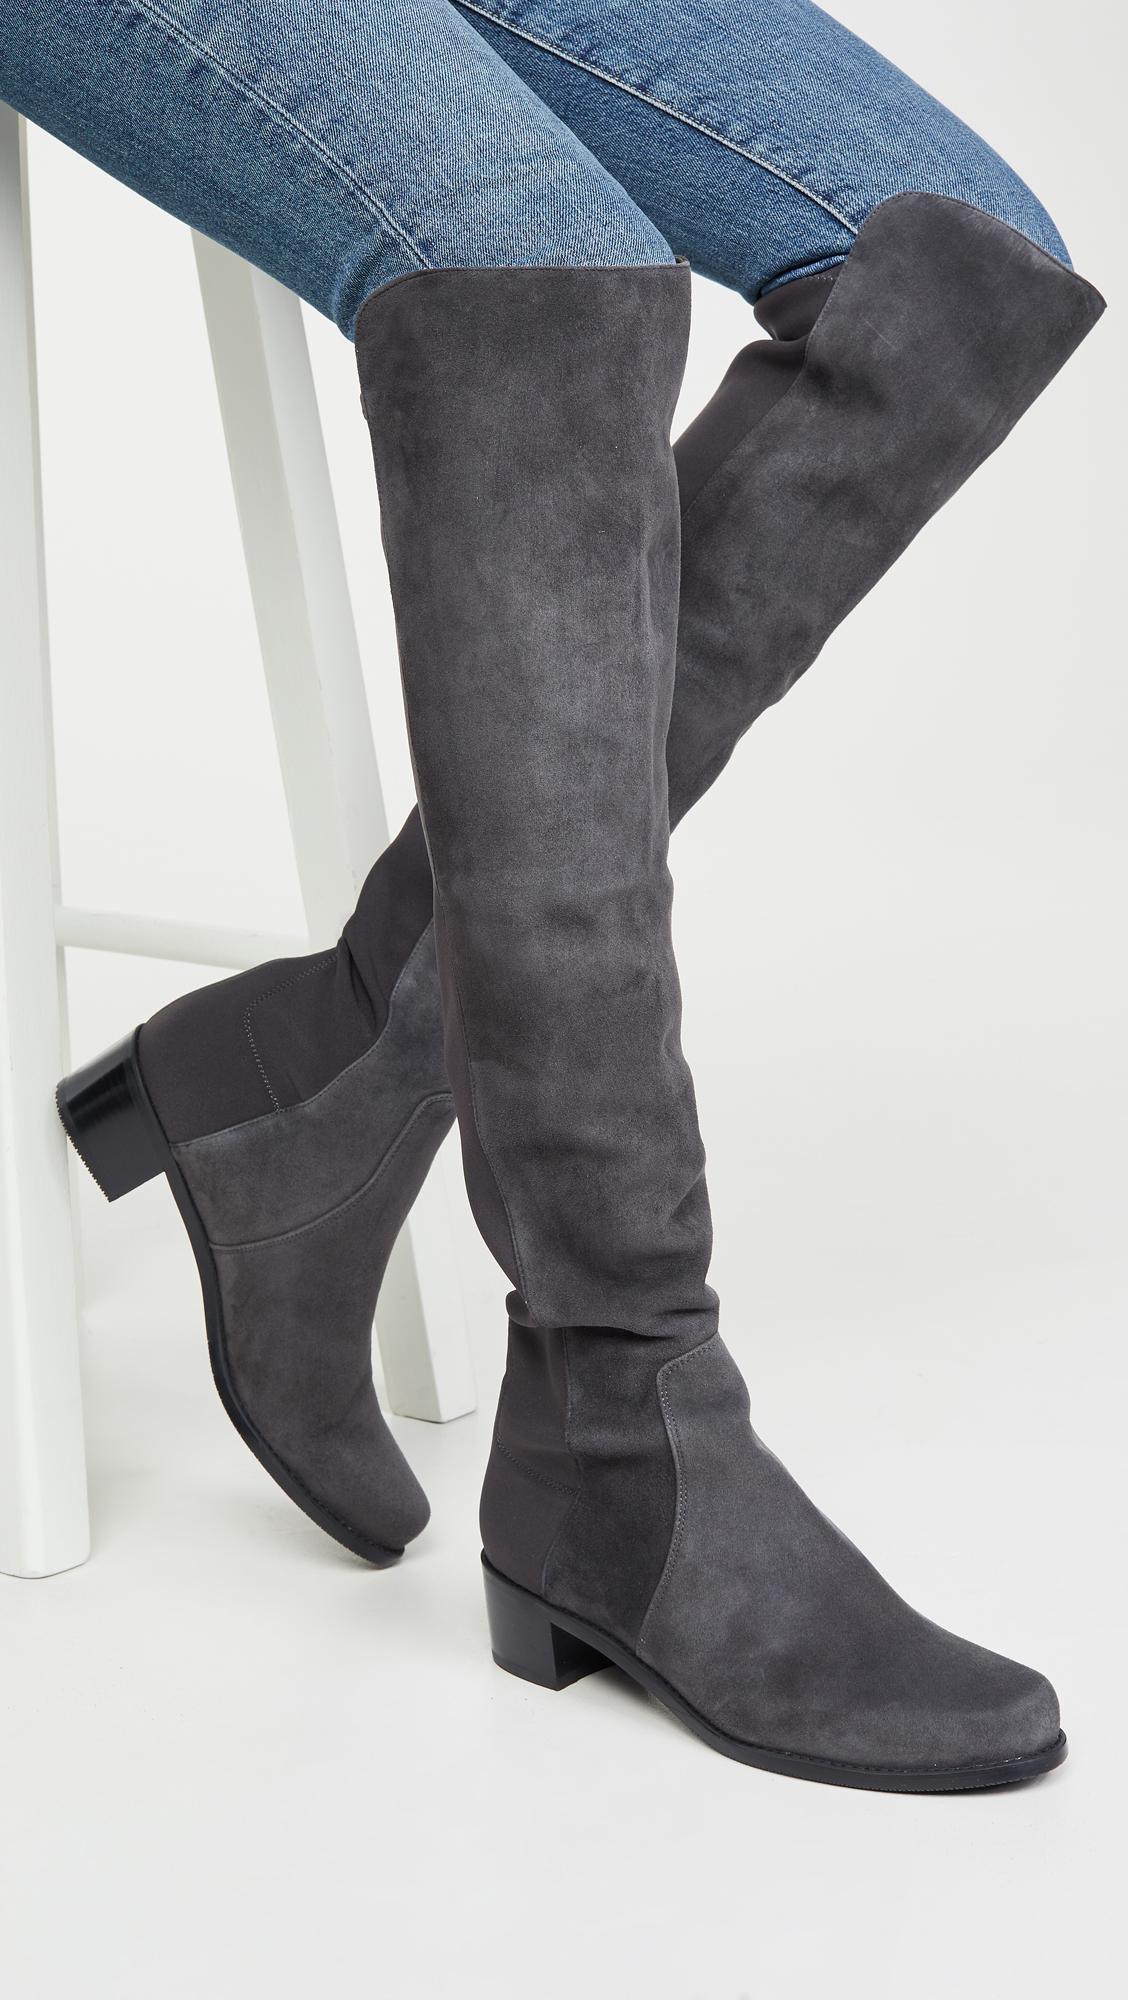 Stuart Weitzman Reserve Stretch Suede Boots in Slate (Gray) - Lyst